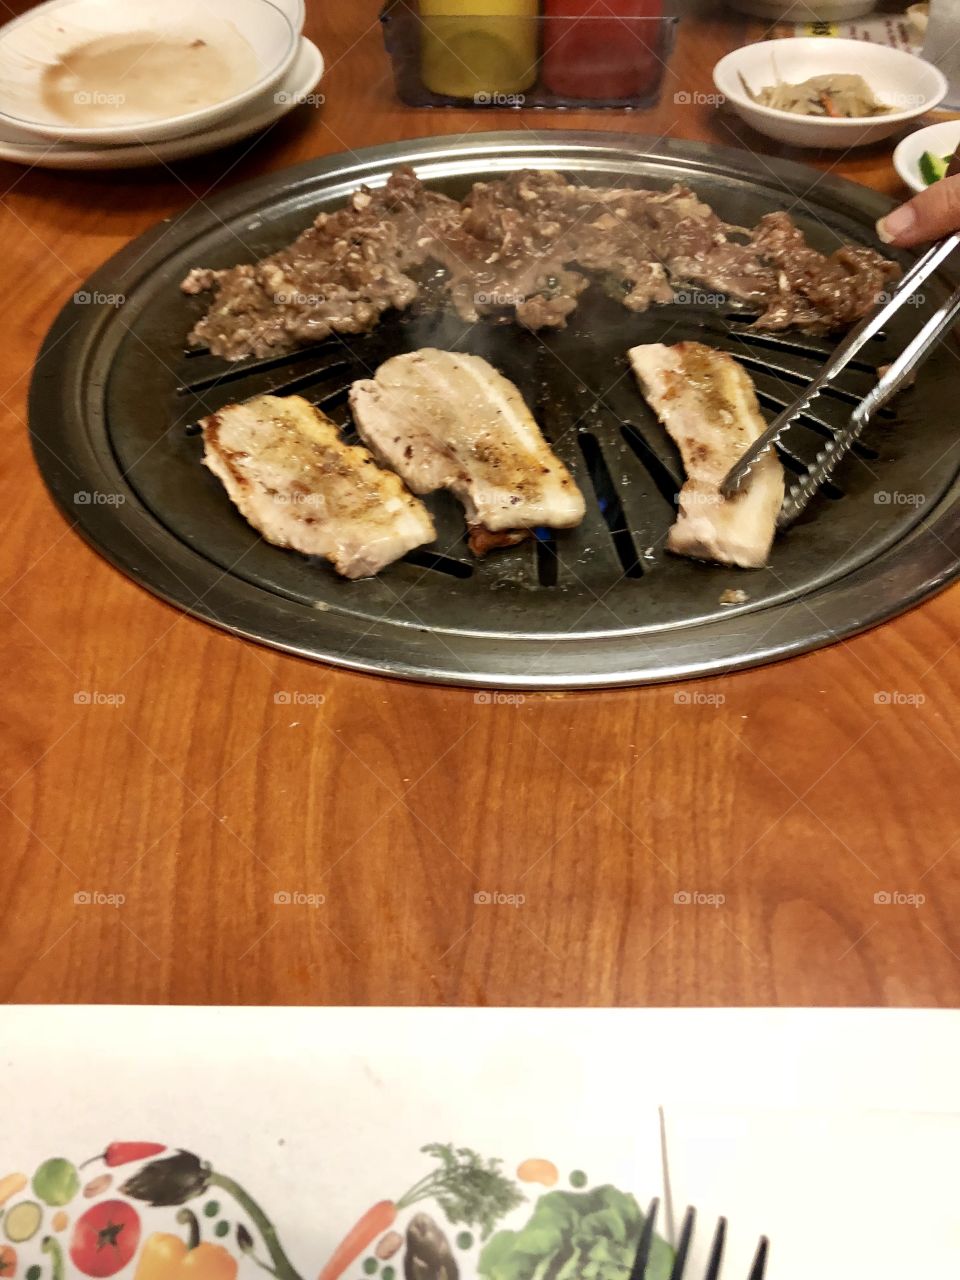 Pork and beef on table grill at Korean BBQ restaurant.